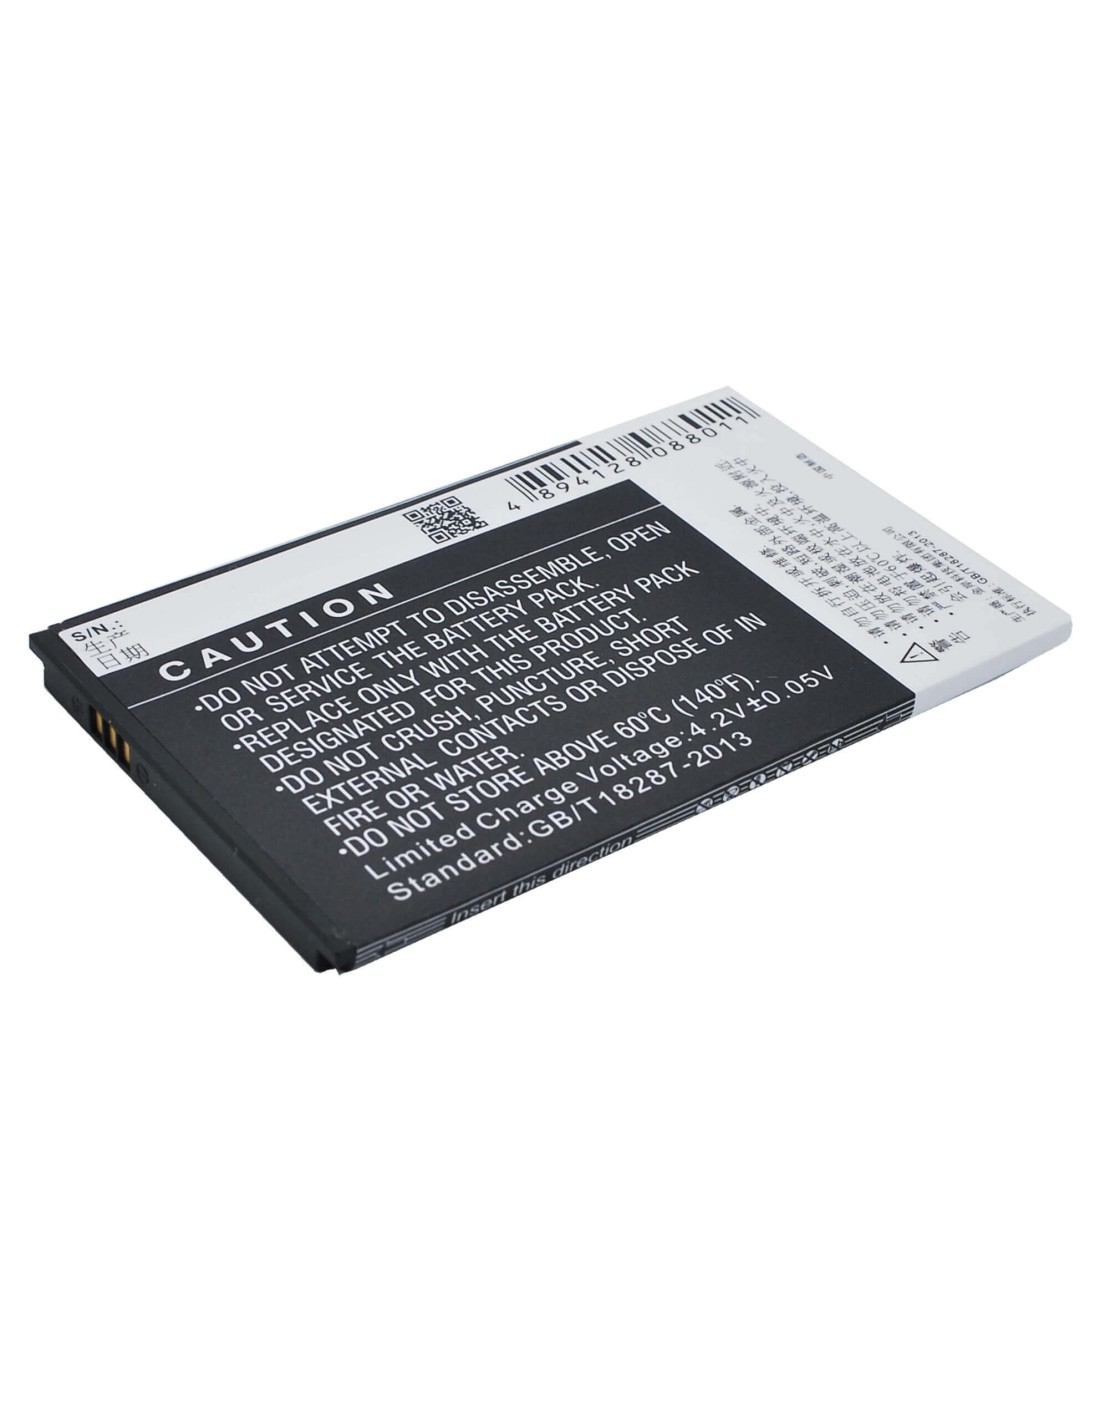 Battery for Coolpad 8022, 5110 3.7V, 1600mAh - 5.92Wh